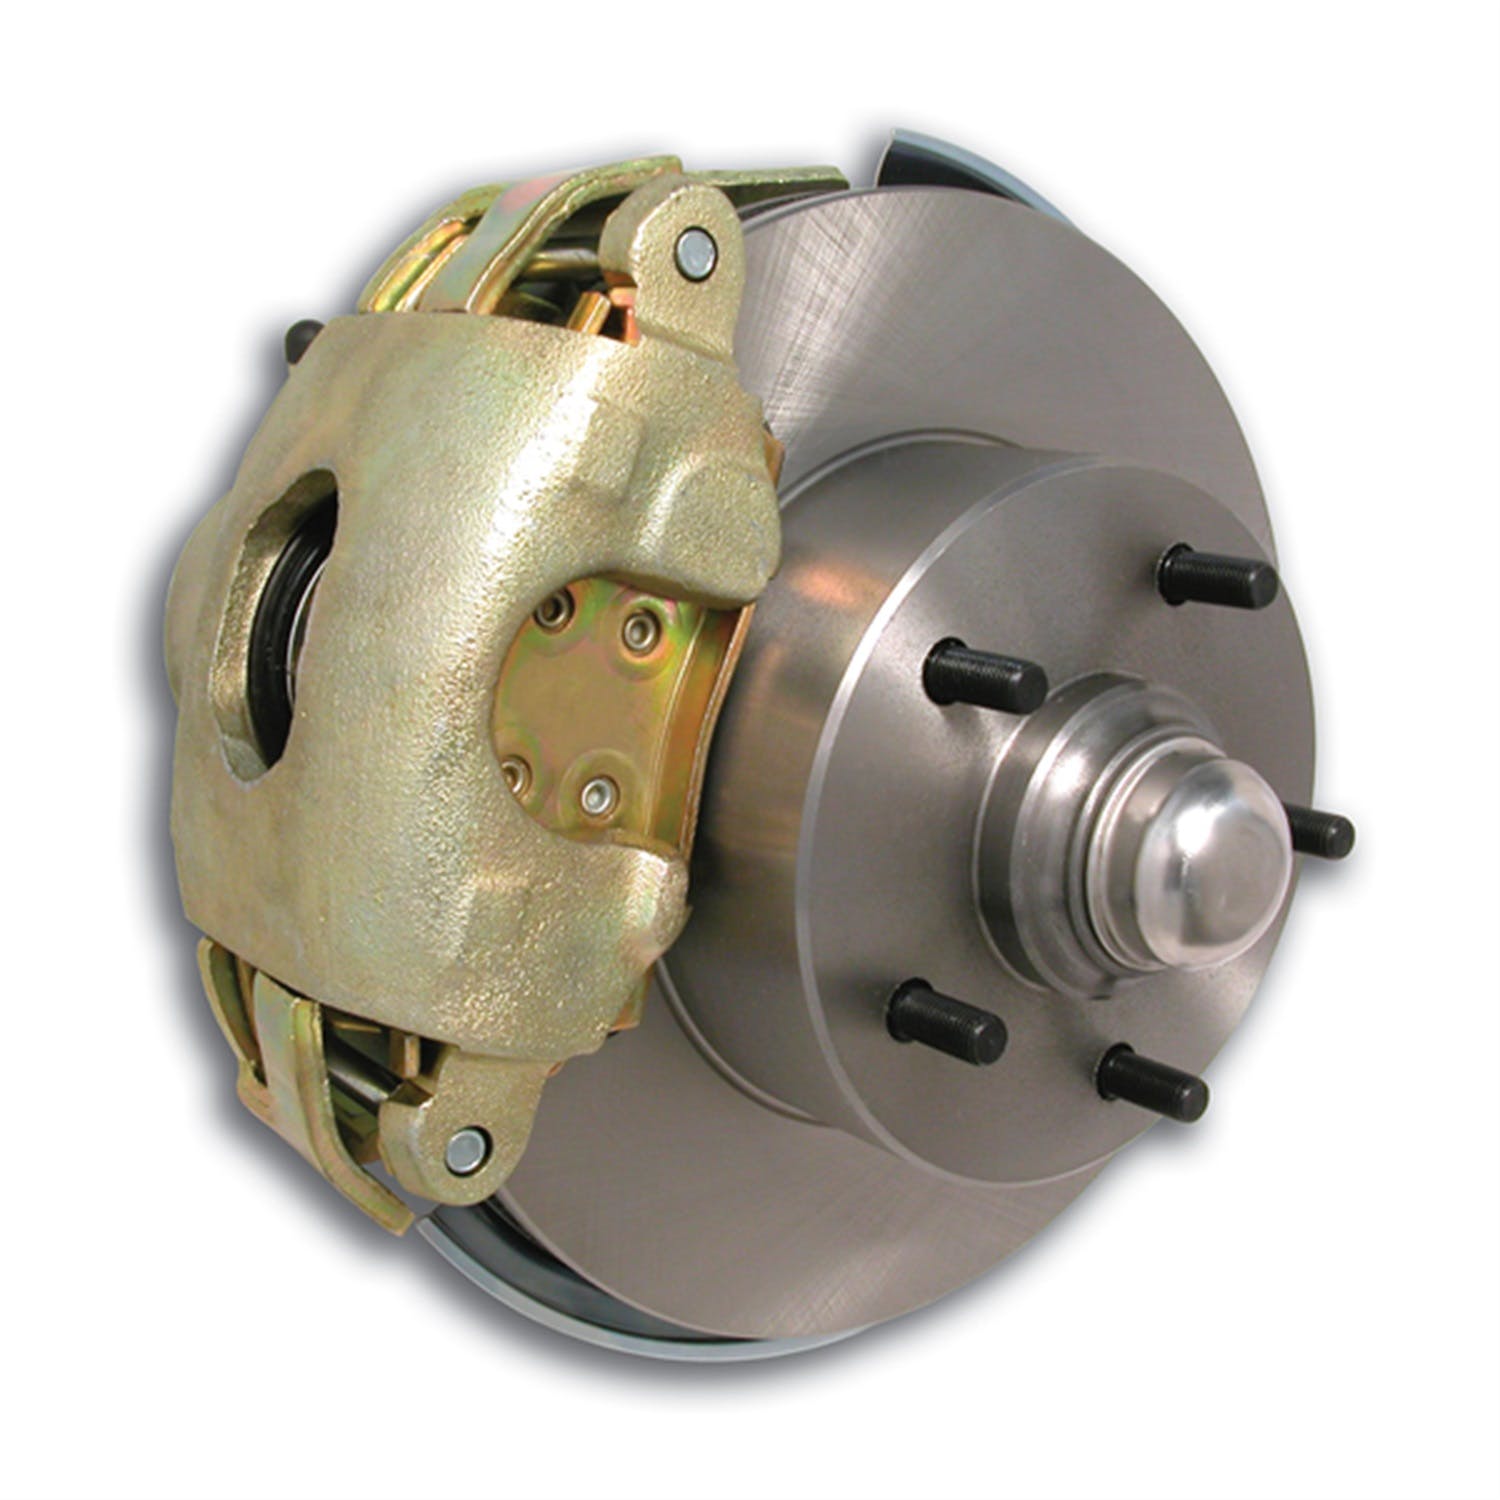 Stainless Steel Brakes W123DS At The WheelsFront drm/dsc conv kit 64+GM 2in. drp